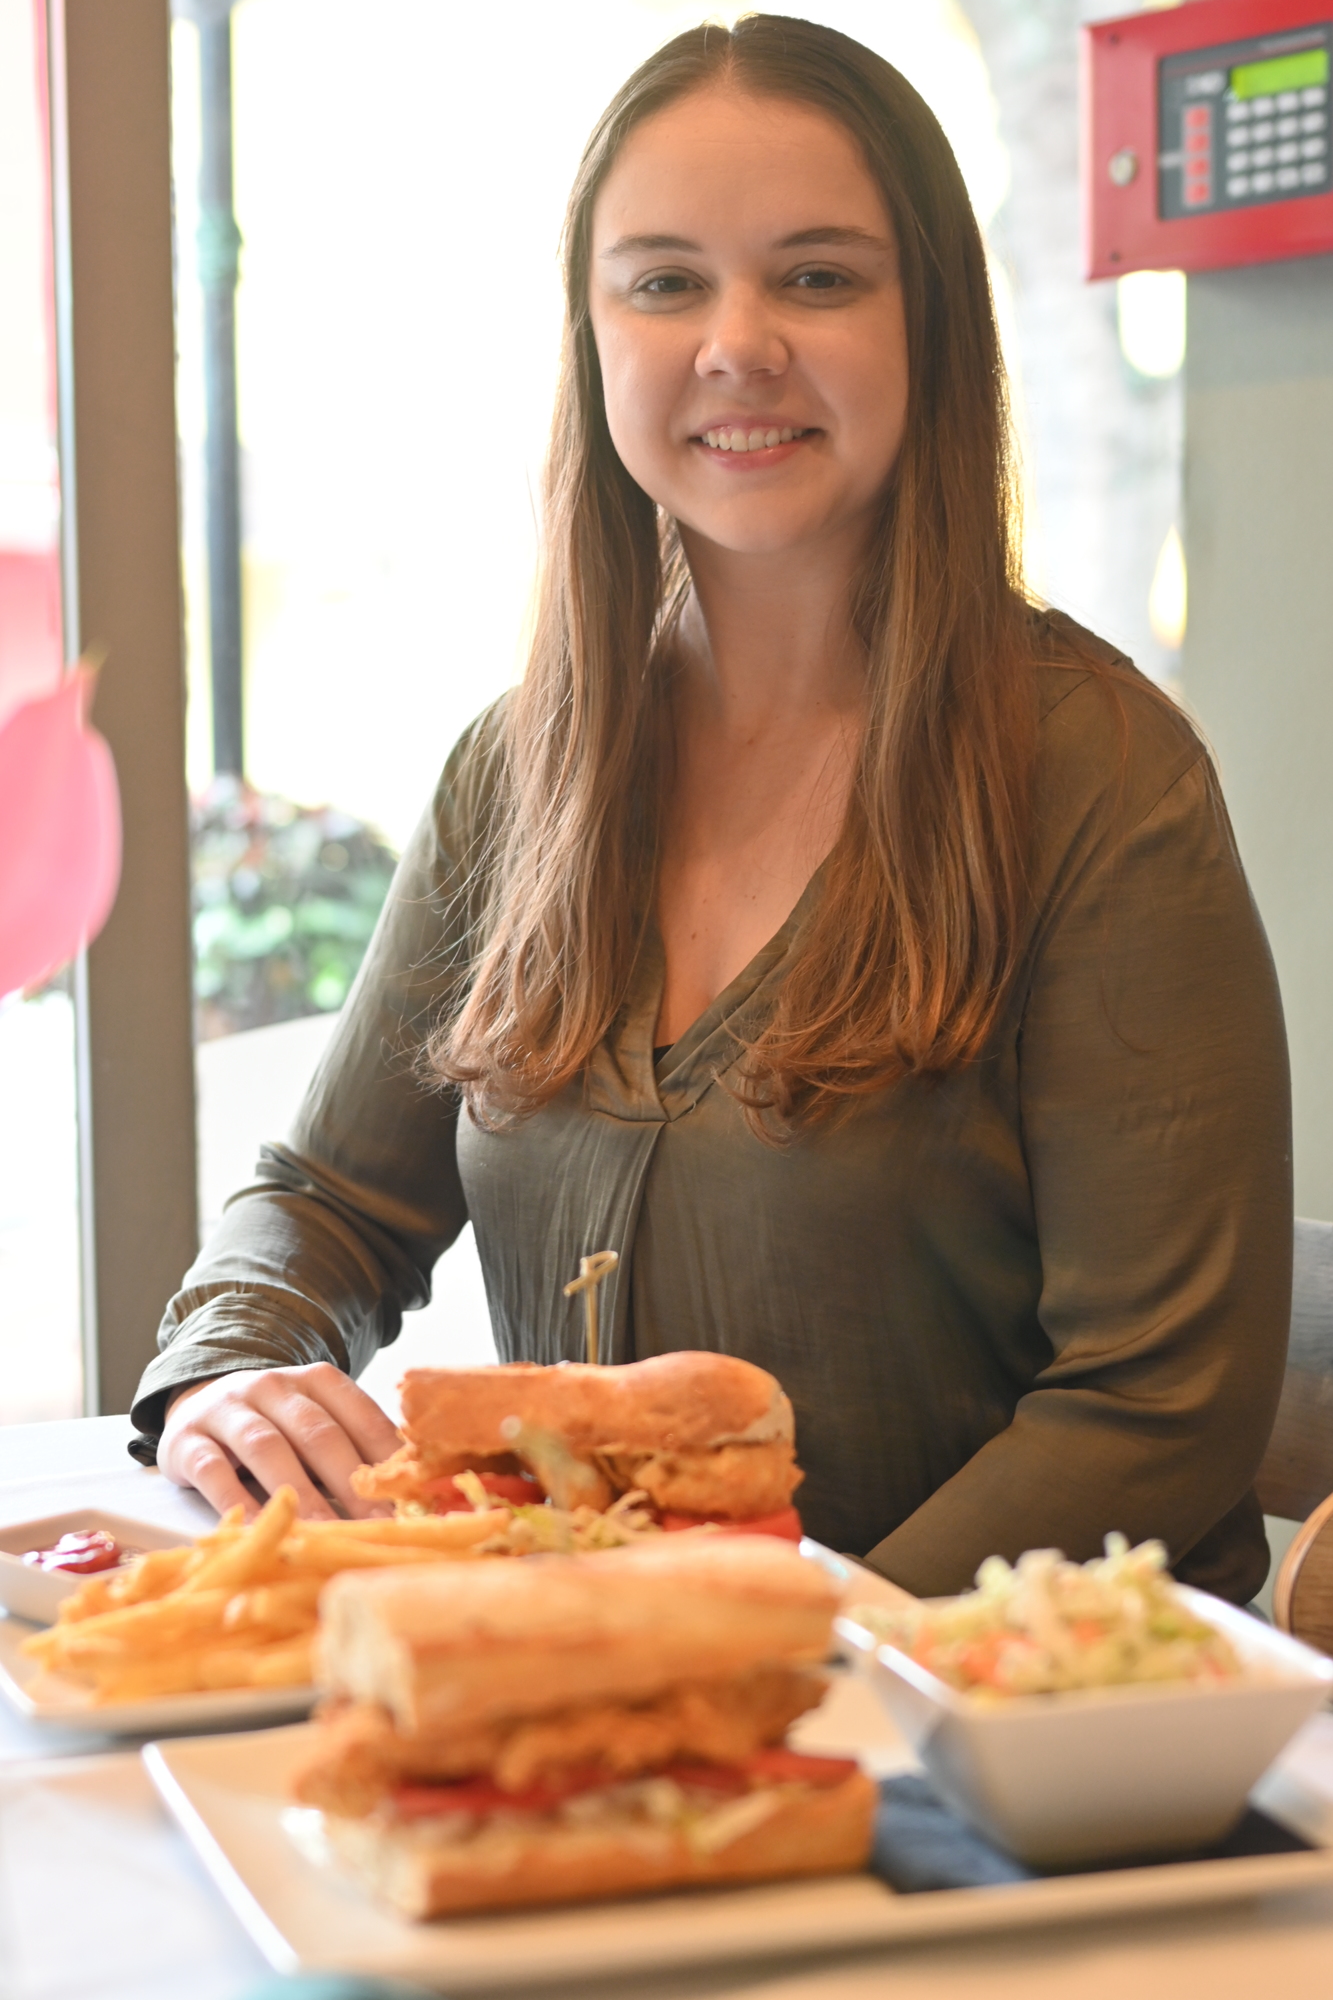 Duval's marketing manager Kelly Dungan says that the po'boy has become the restaurant's signature item. (Photo by Spencer Fordin)